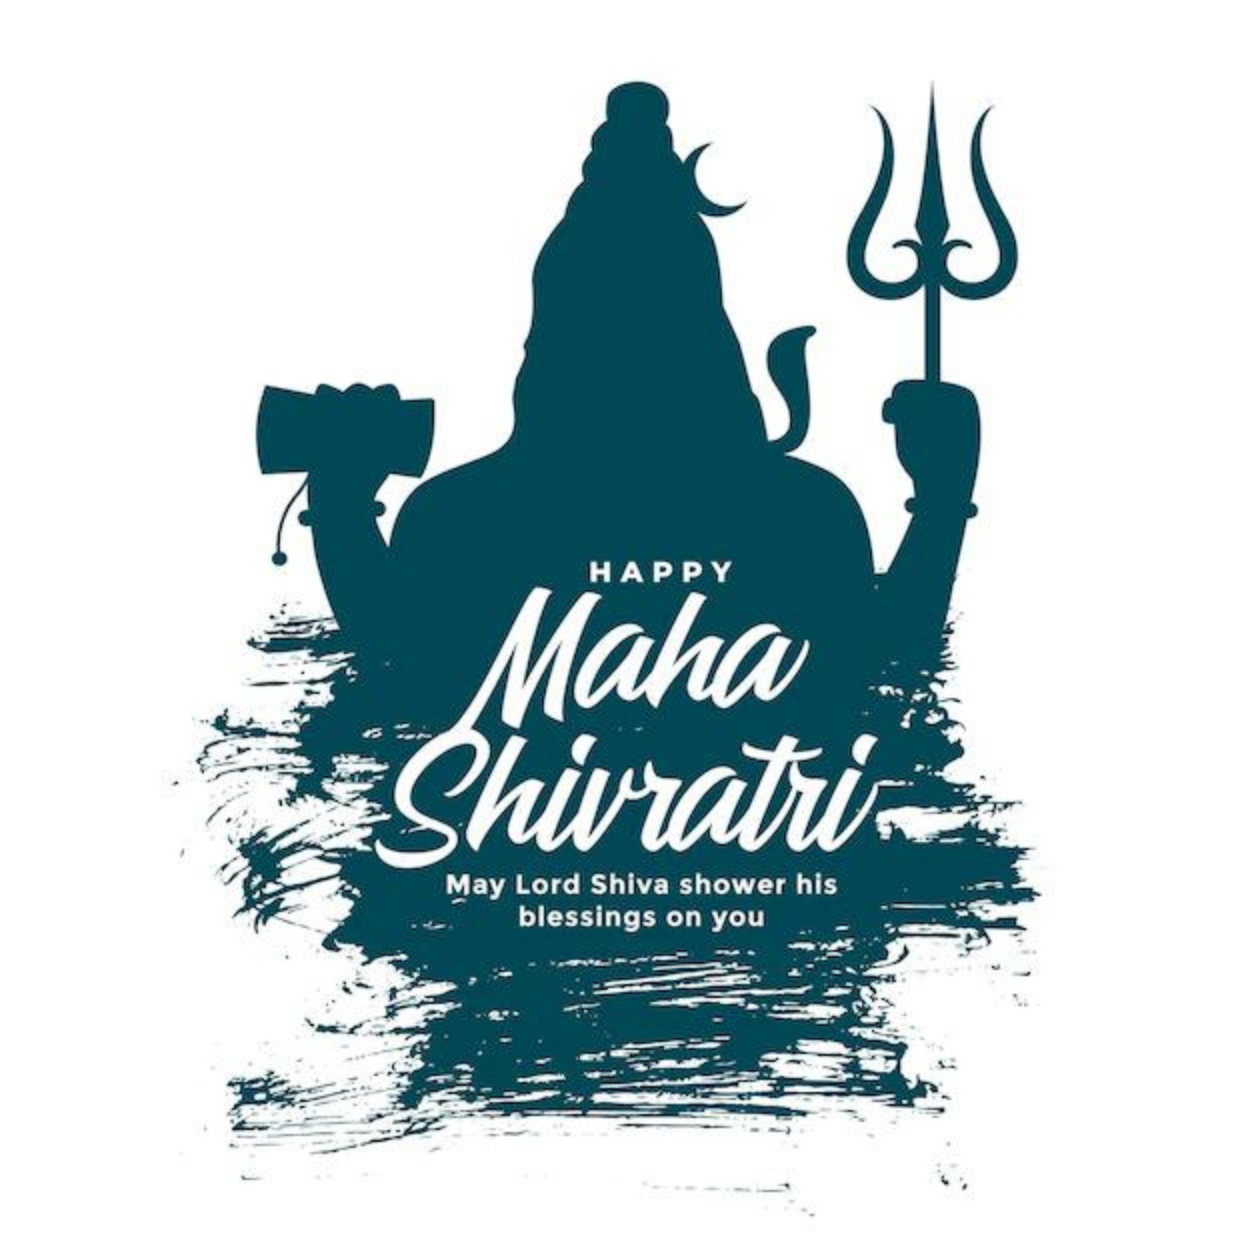 Download Maha shivratri with lord shiva - Hindu god shiva for your mobile  cell phone